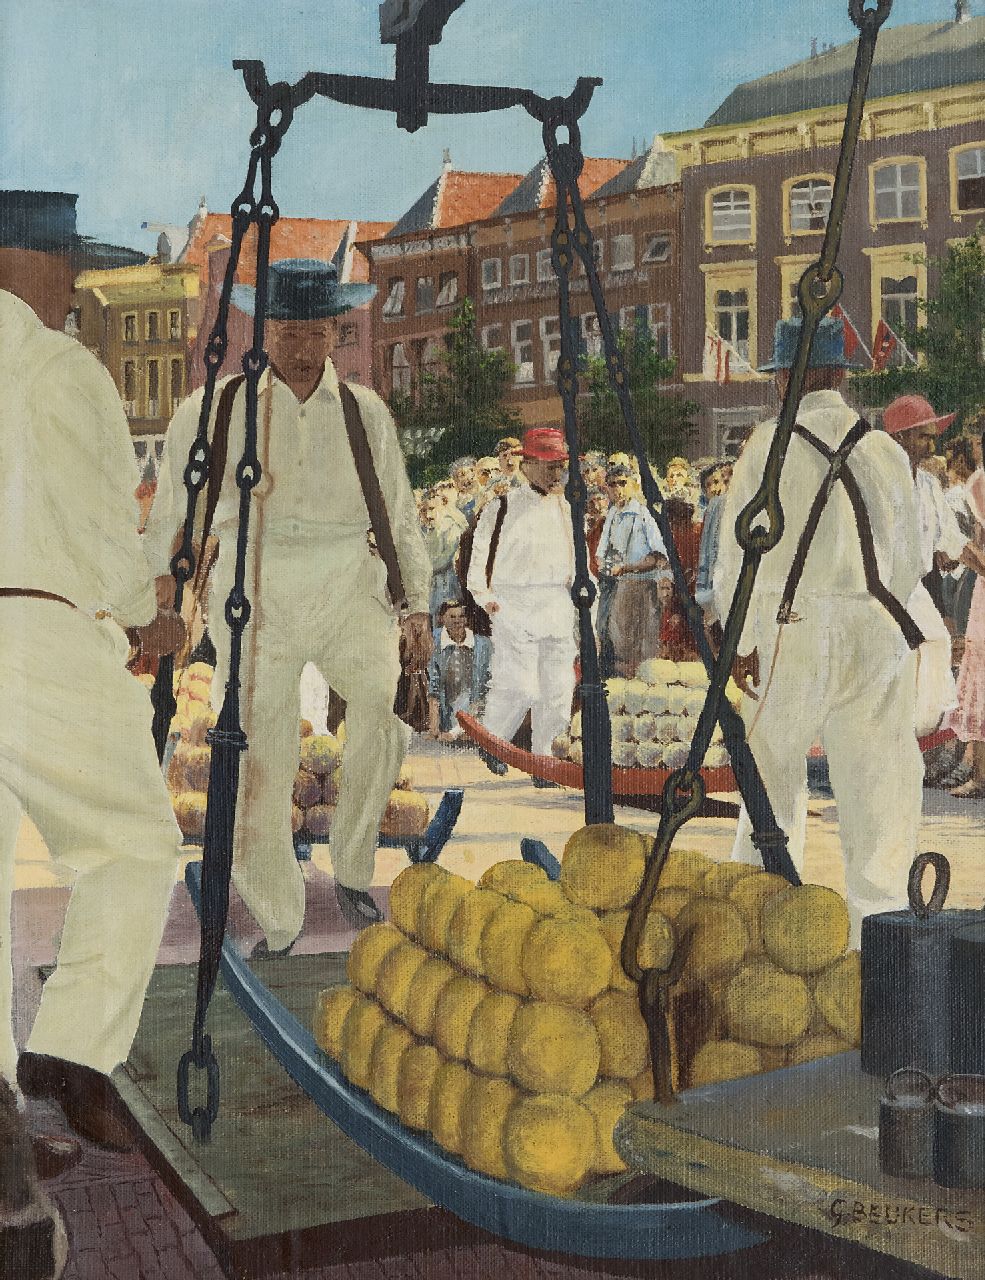 Beukers G.  | Beukers | Paintings offered for sale | Cheese carriers in Alkmaar, oil on canvas laid down on panel 39.2 x 30.4 cm, signed l.r.